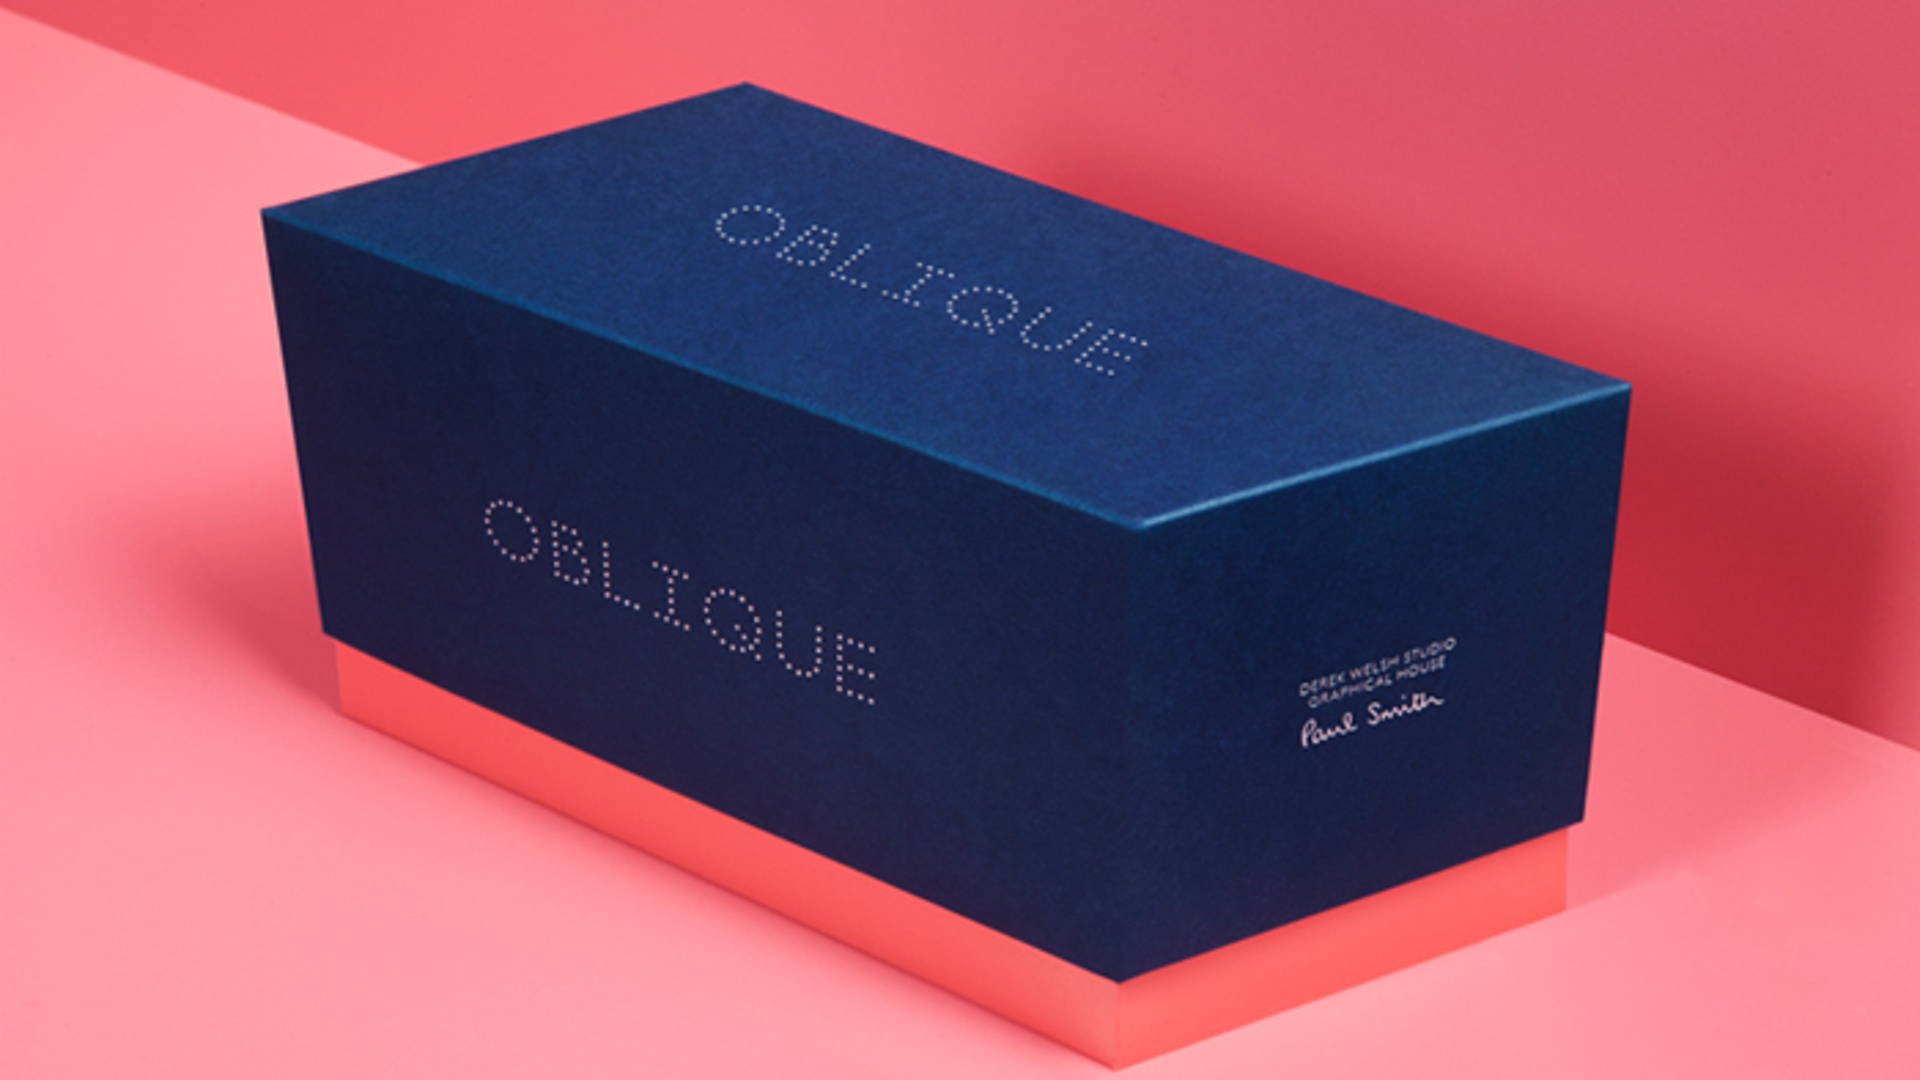 Featured image for Oblique: Paul Smith Dominoes Edition